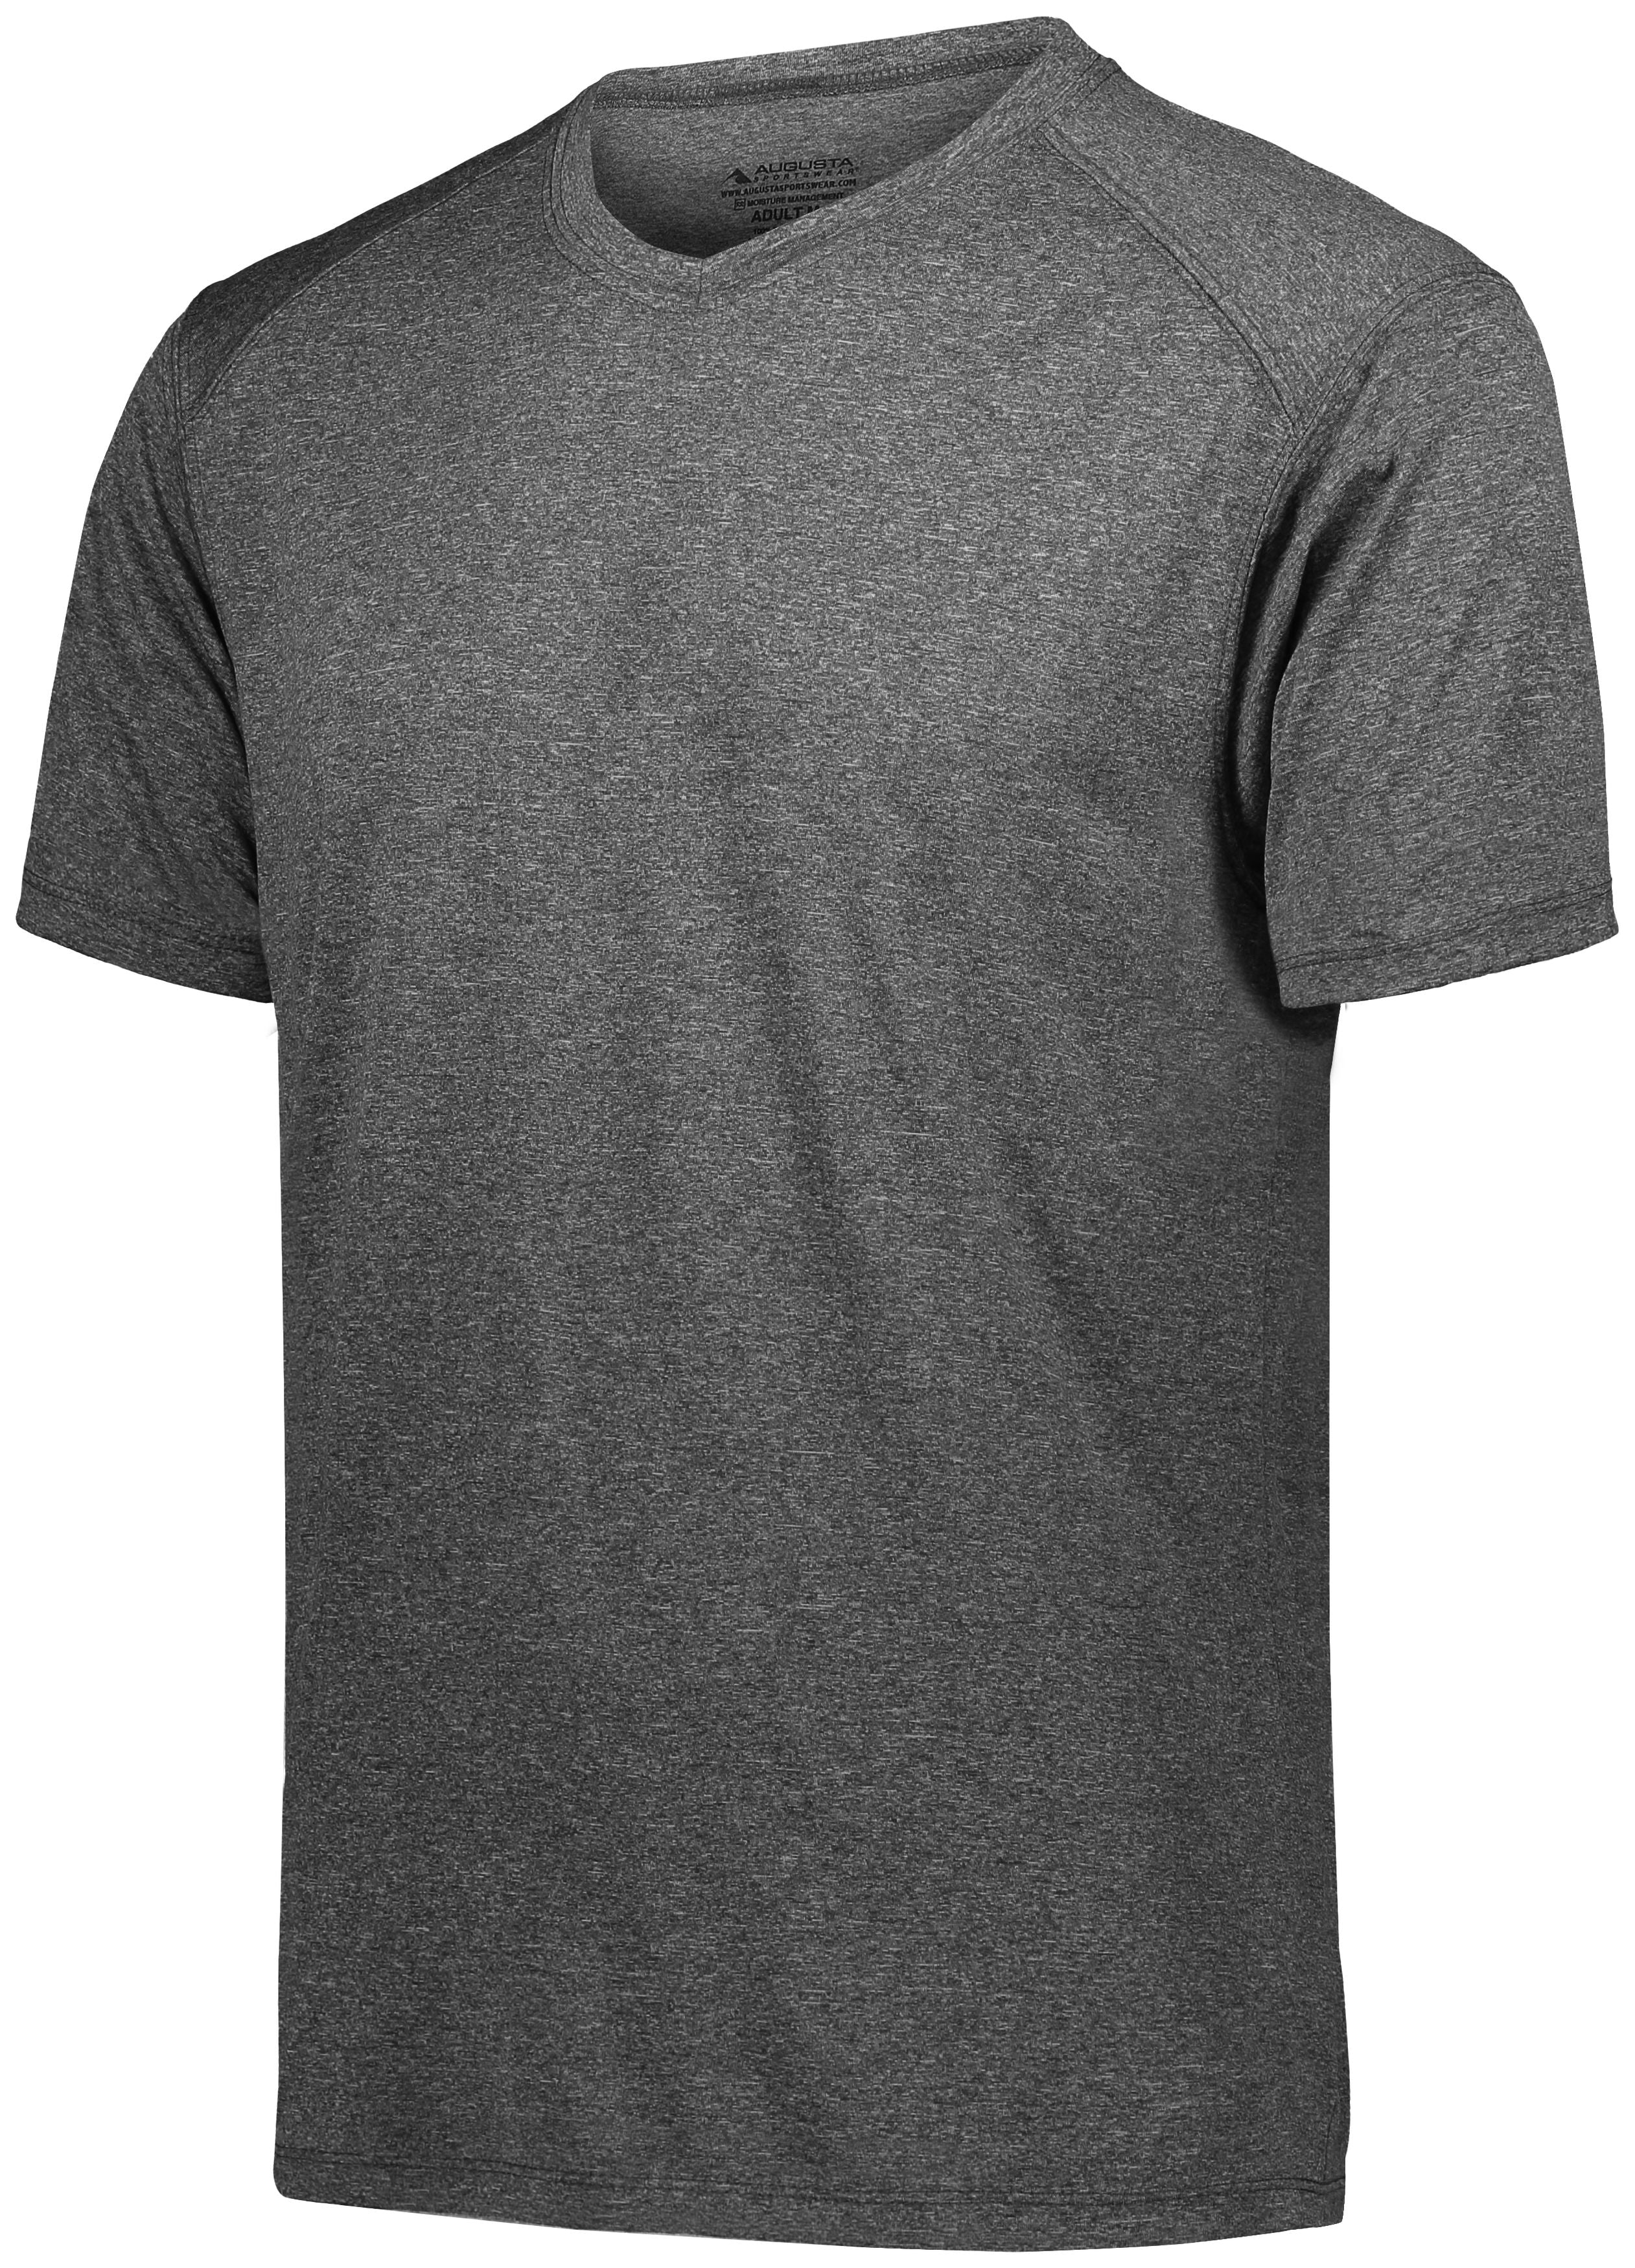 Augusta Sportswear Kinergy Training Tee in Black Heather  -Part of the Adult, Adult-Tee-Shirt, T-Shirts, Augusta-Products, Shirts product lines at KanaleyCreations.com